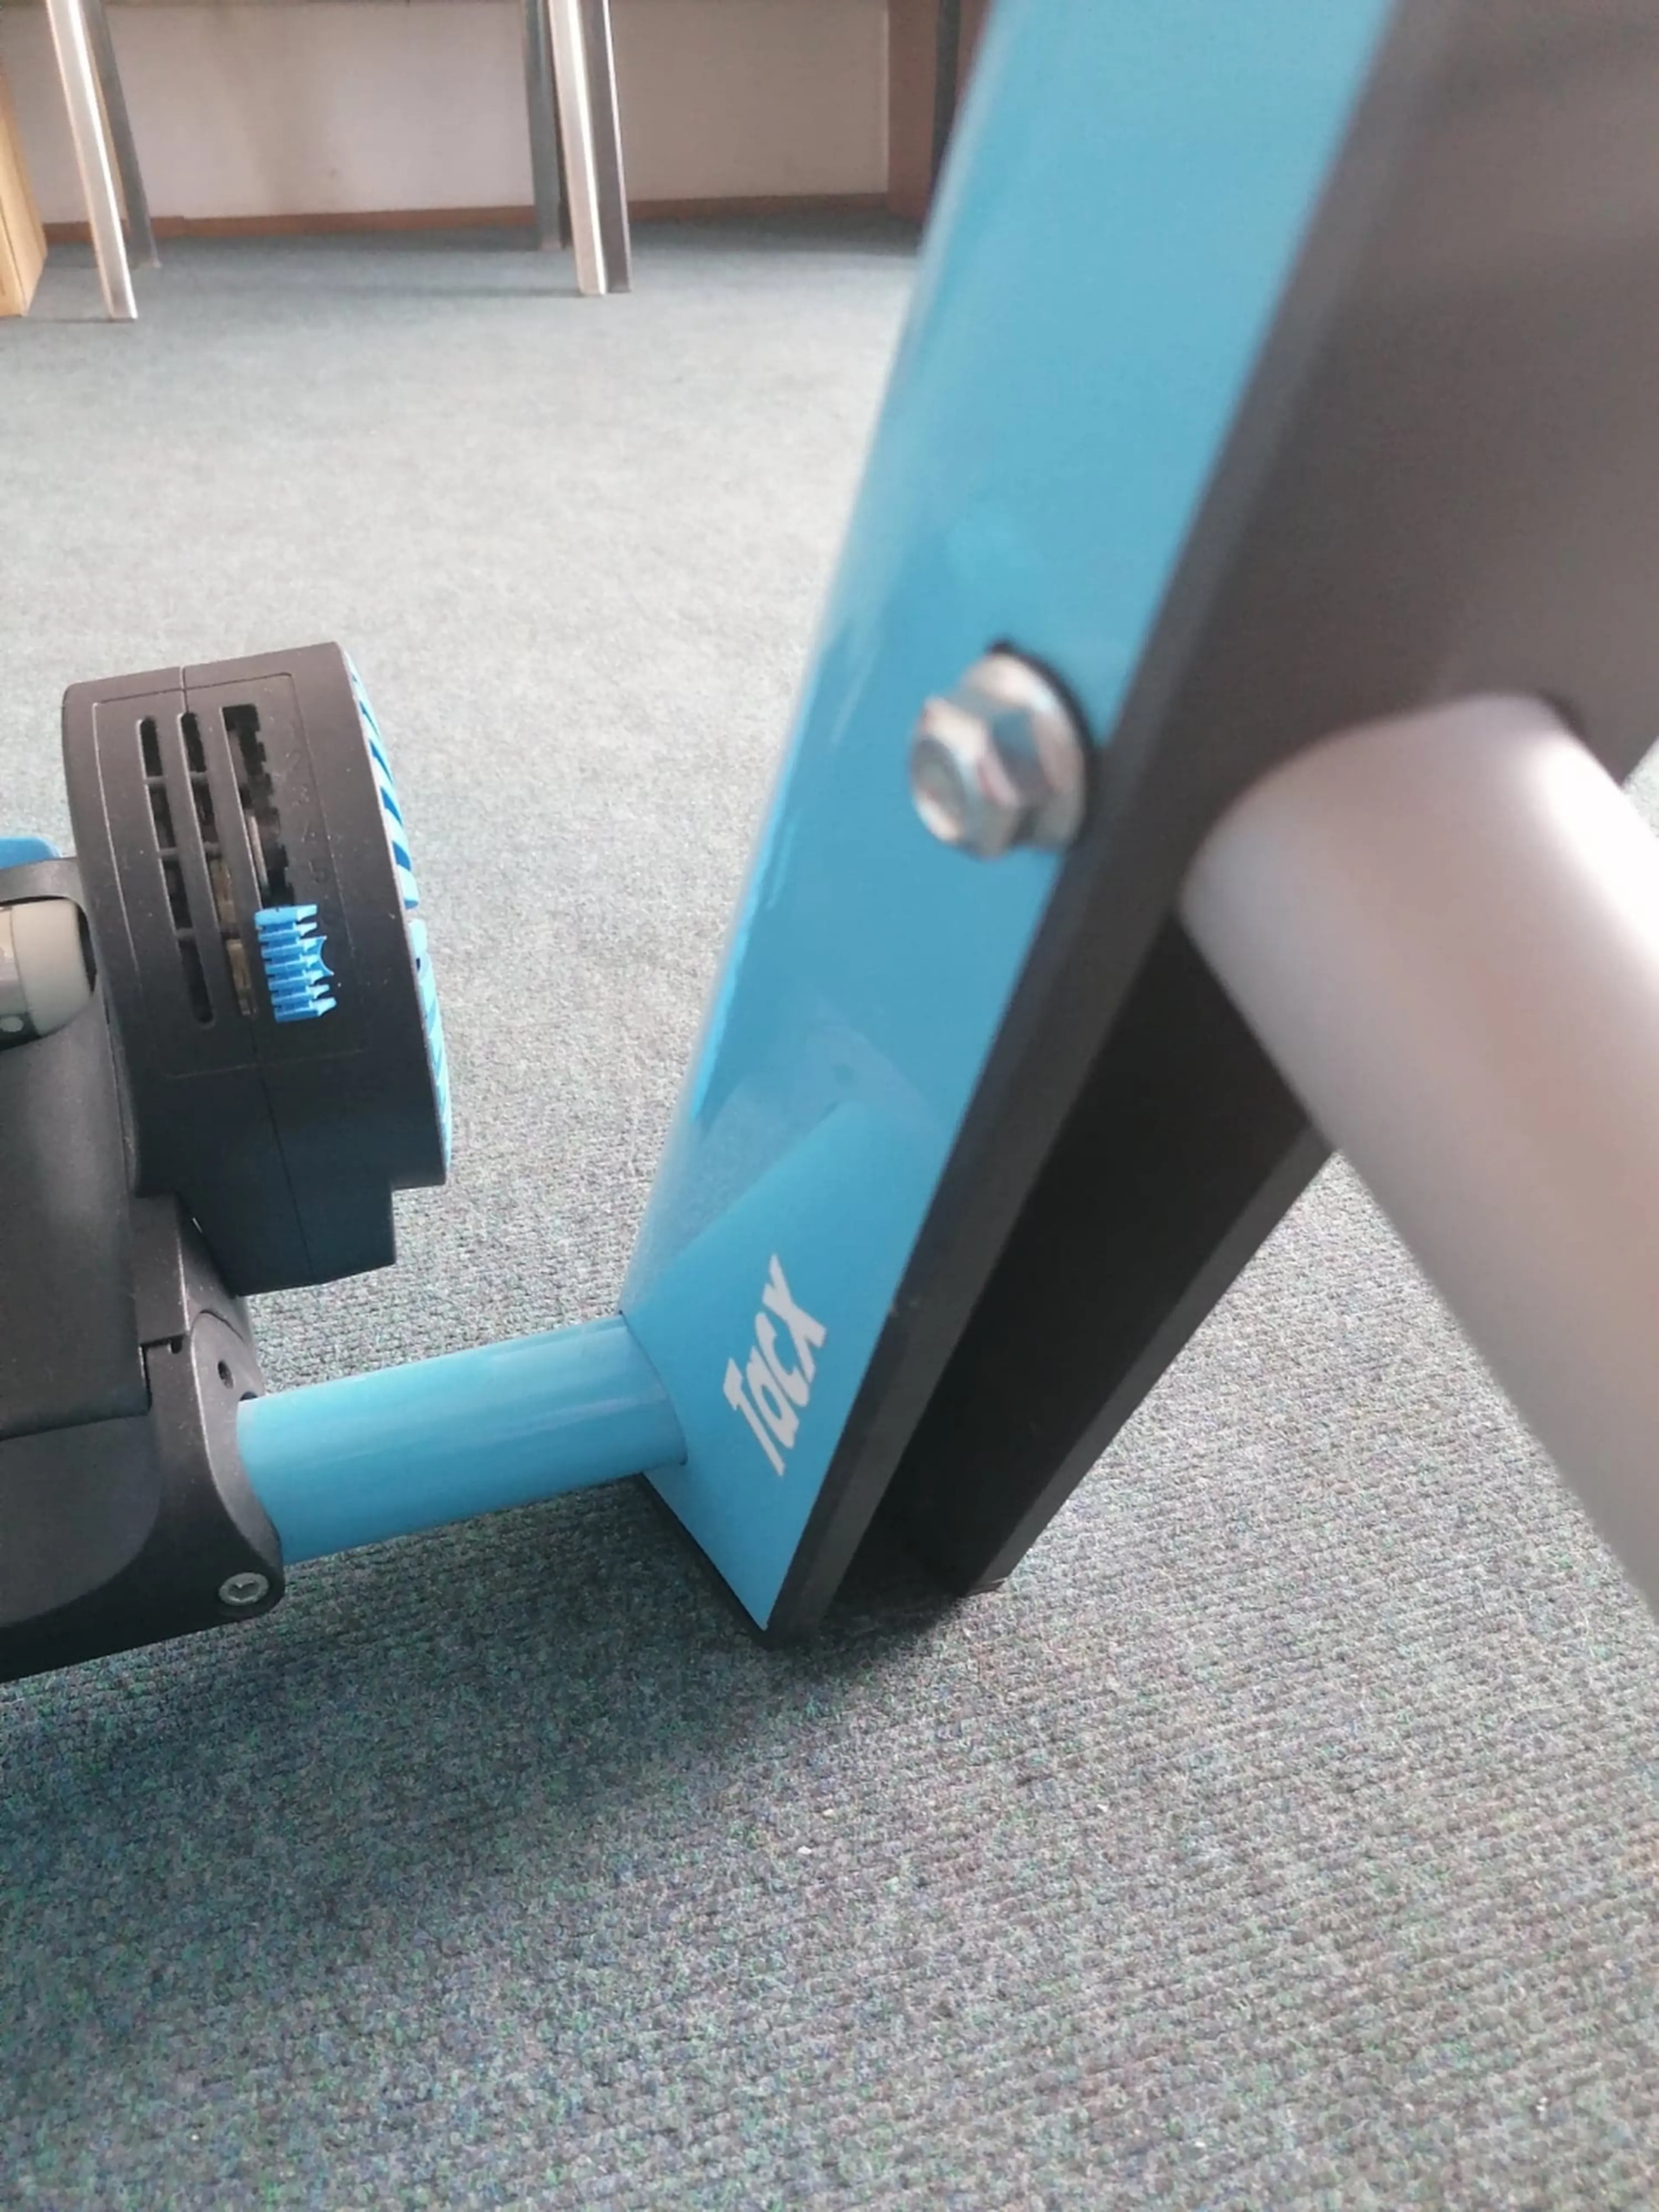 5. Home Trainer Tacx